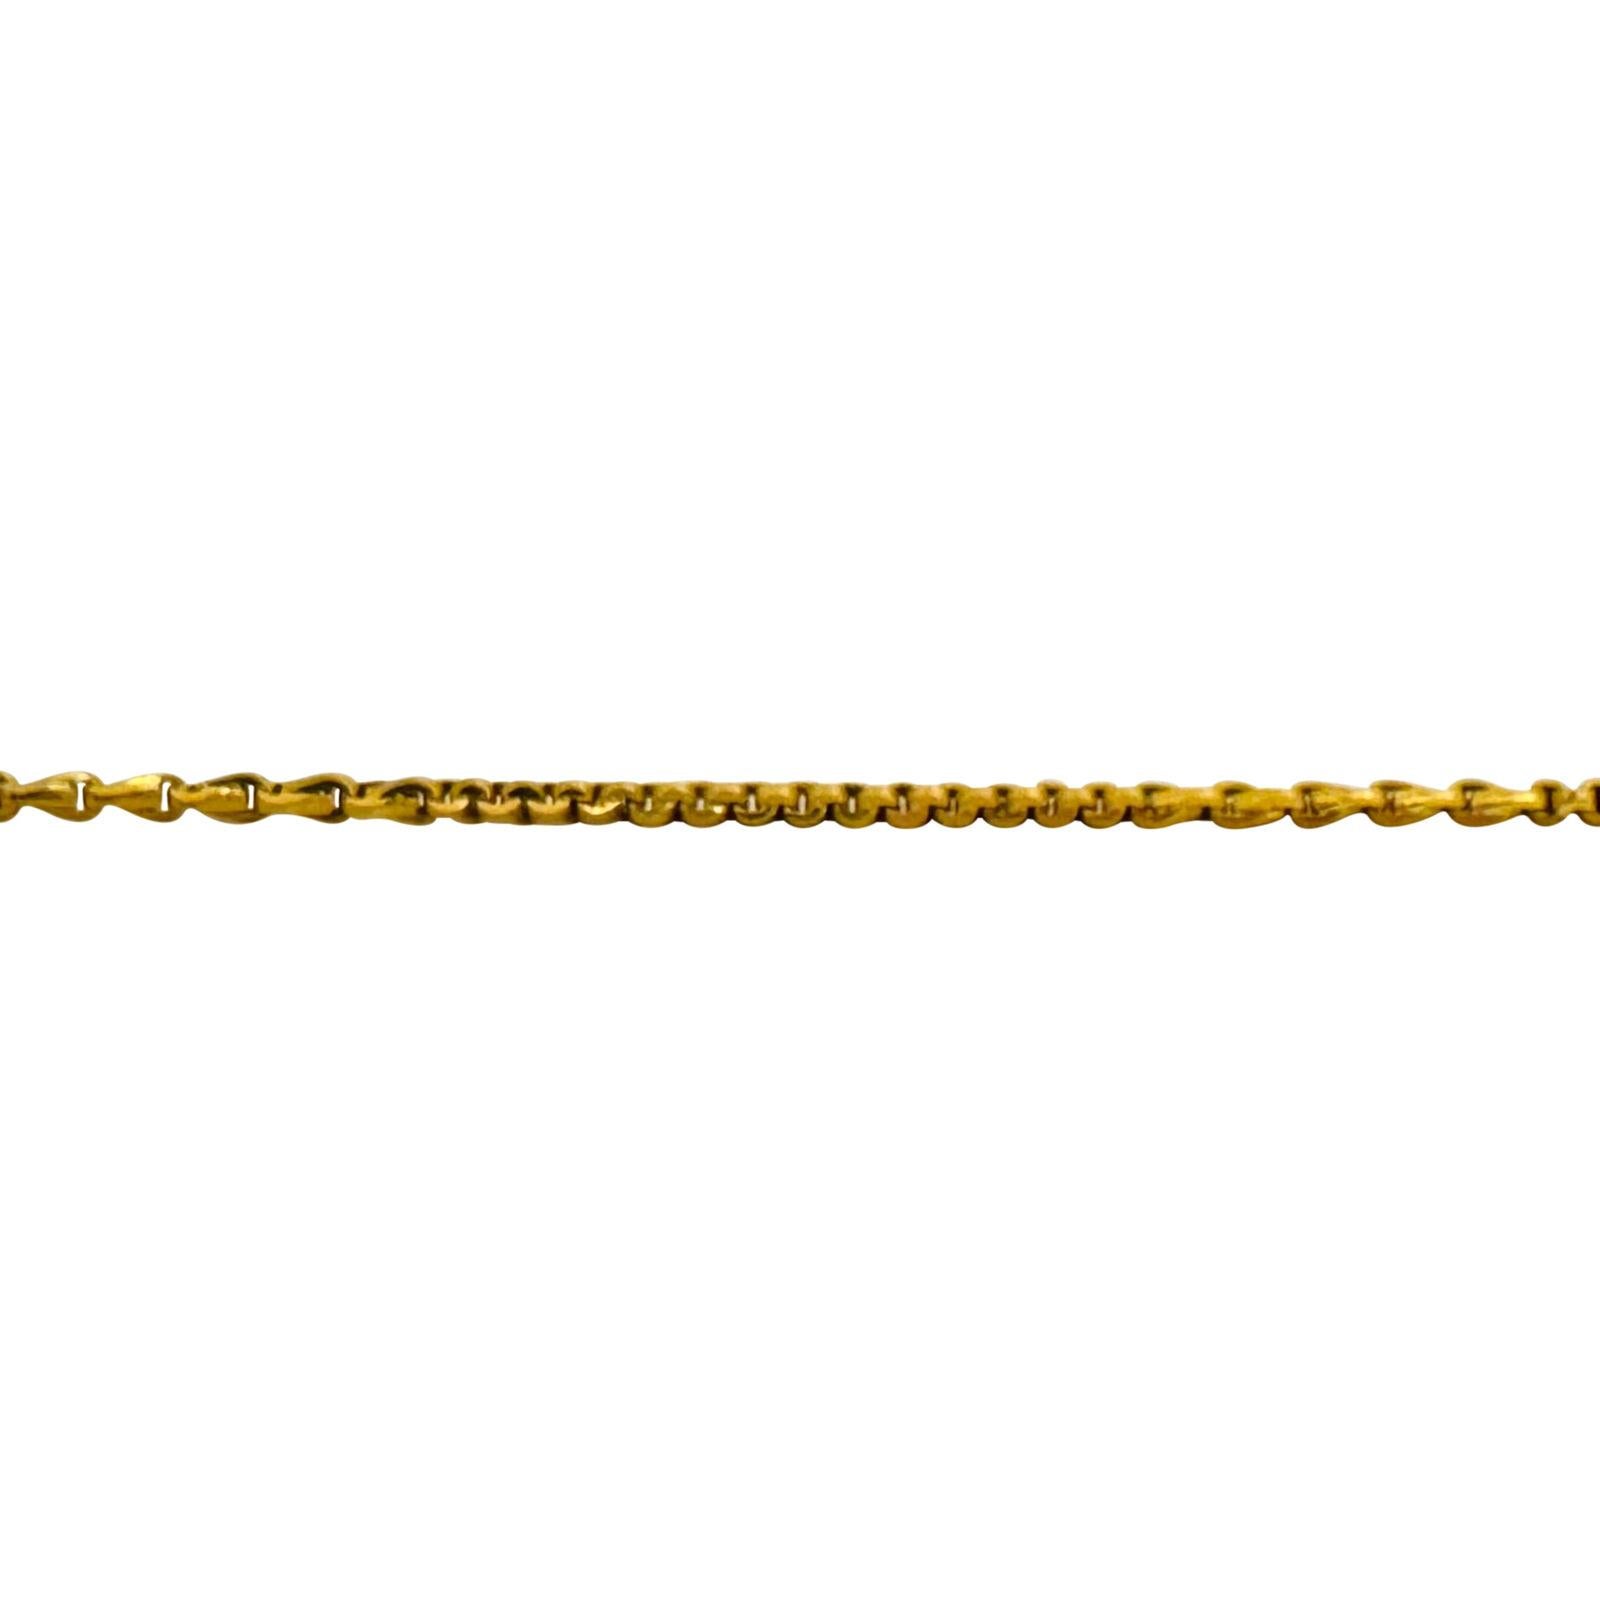 Women's or Men's 22 Karat Yellow Gold Solid Thin Fancy Cable Link Chain Necklace 